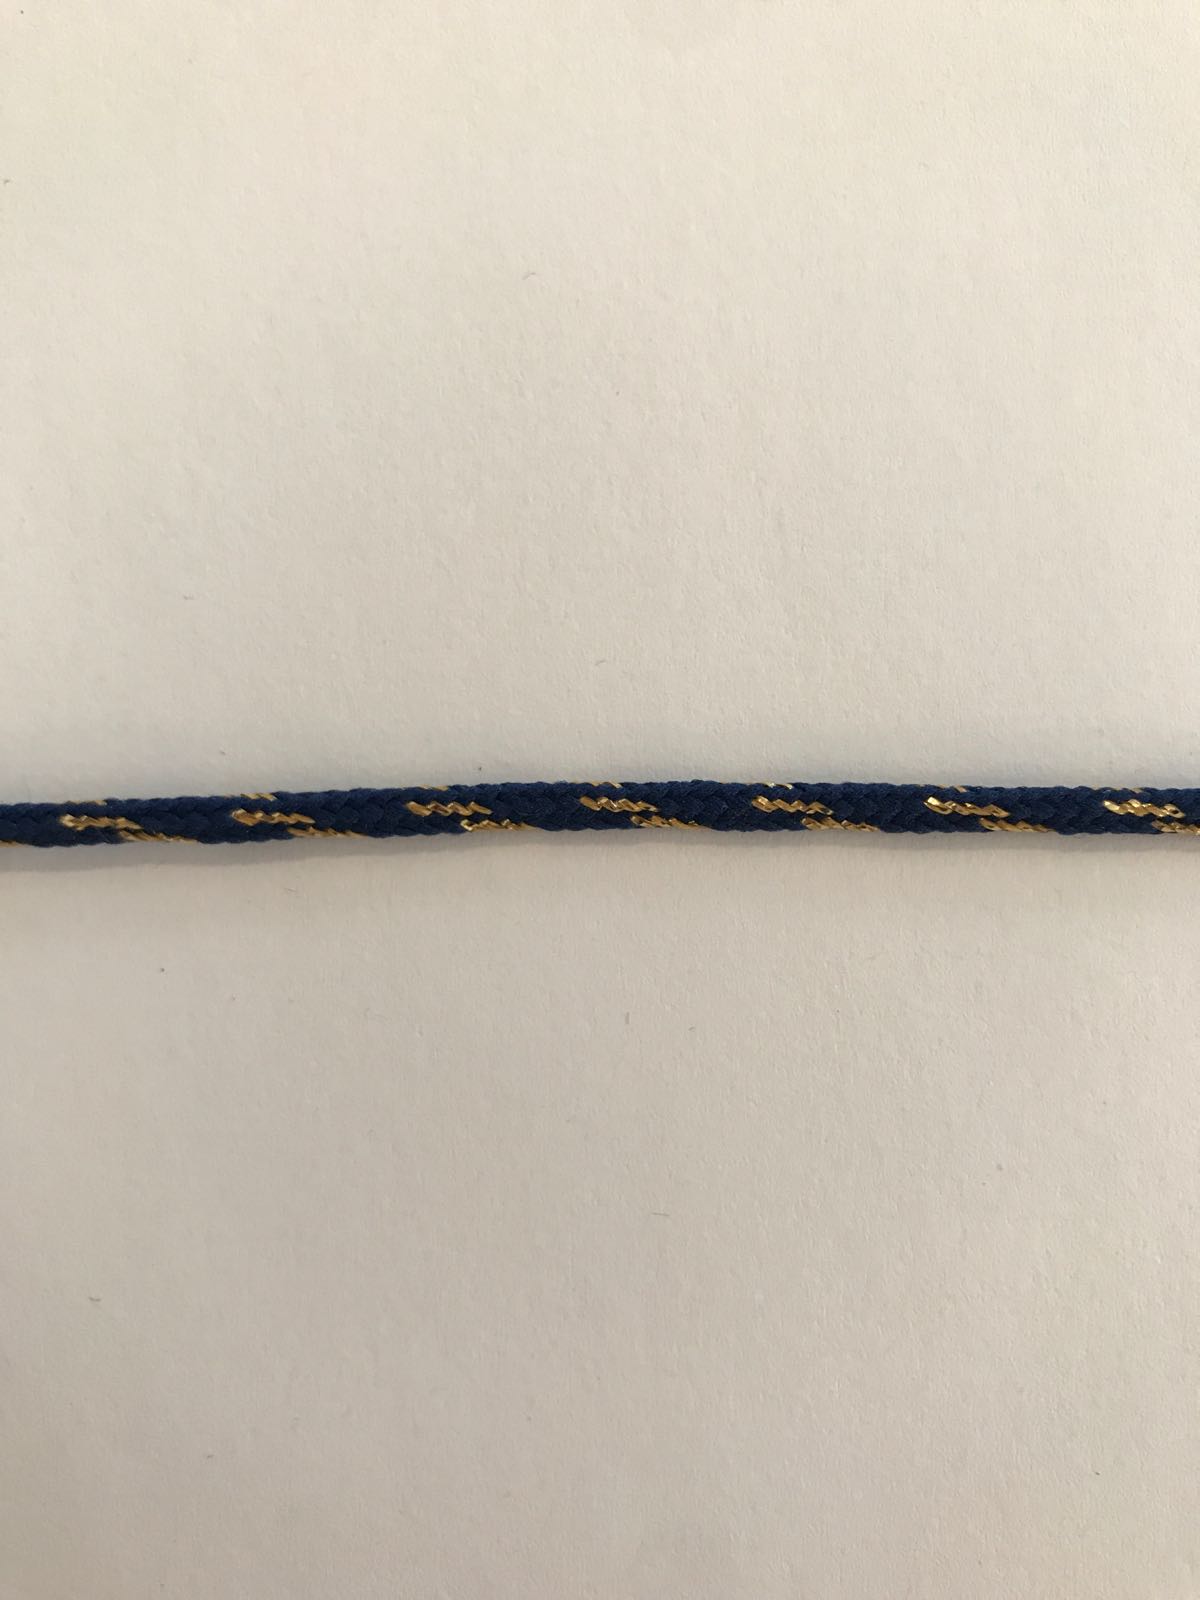 Anorak cord with gold 3 mm